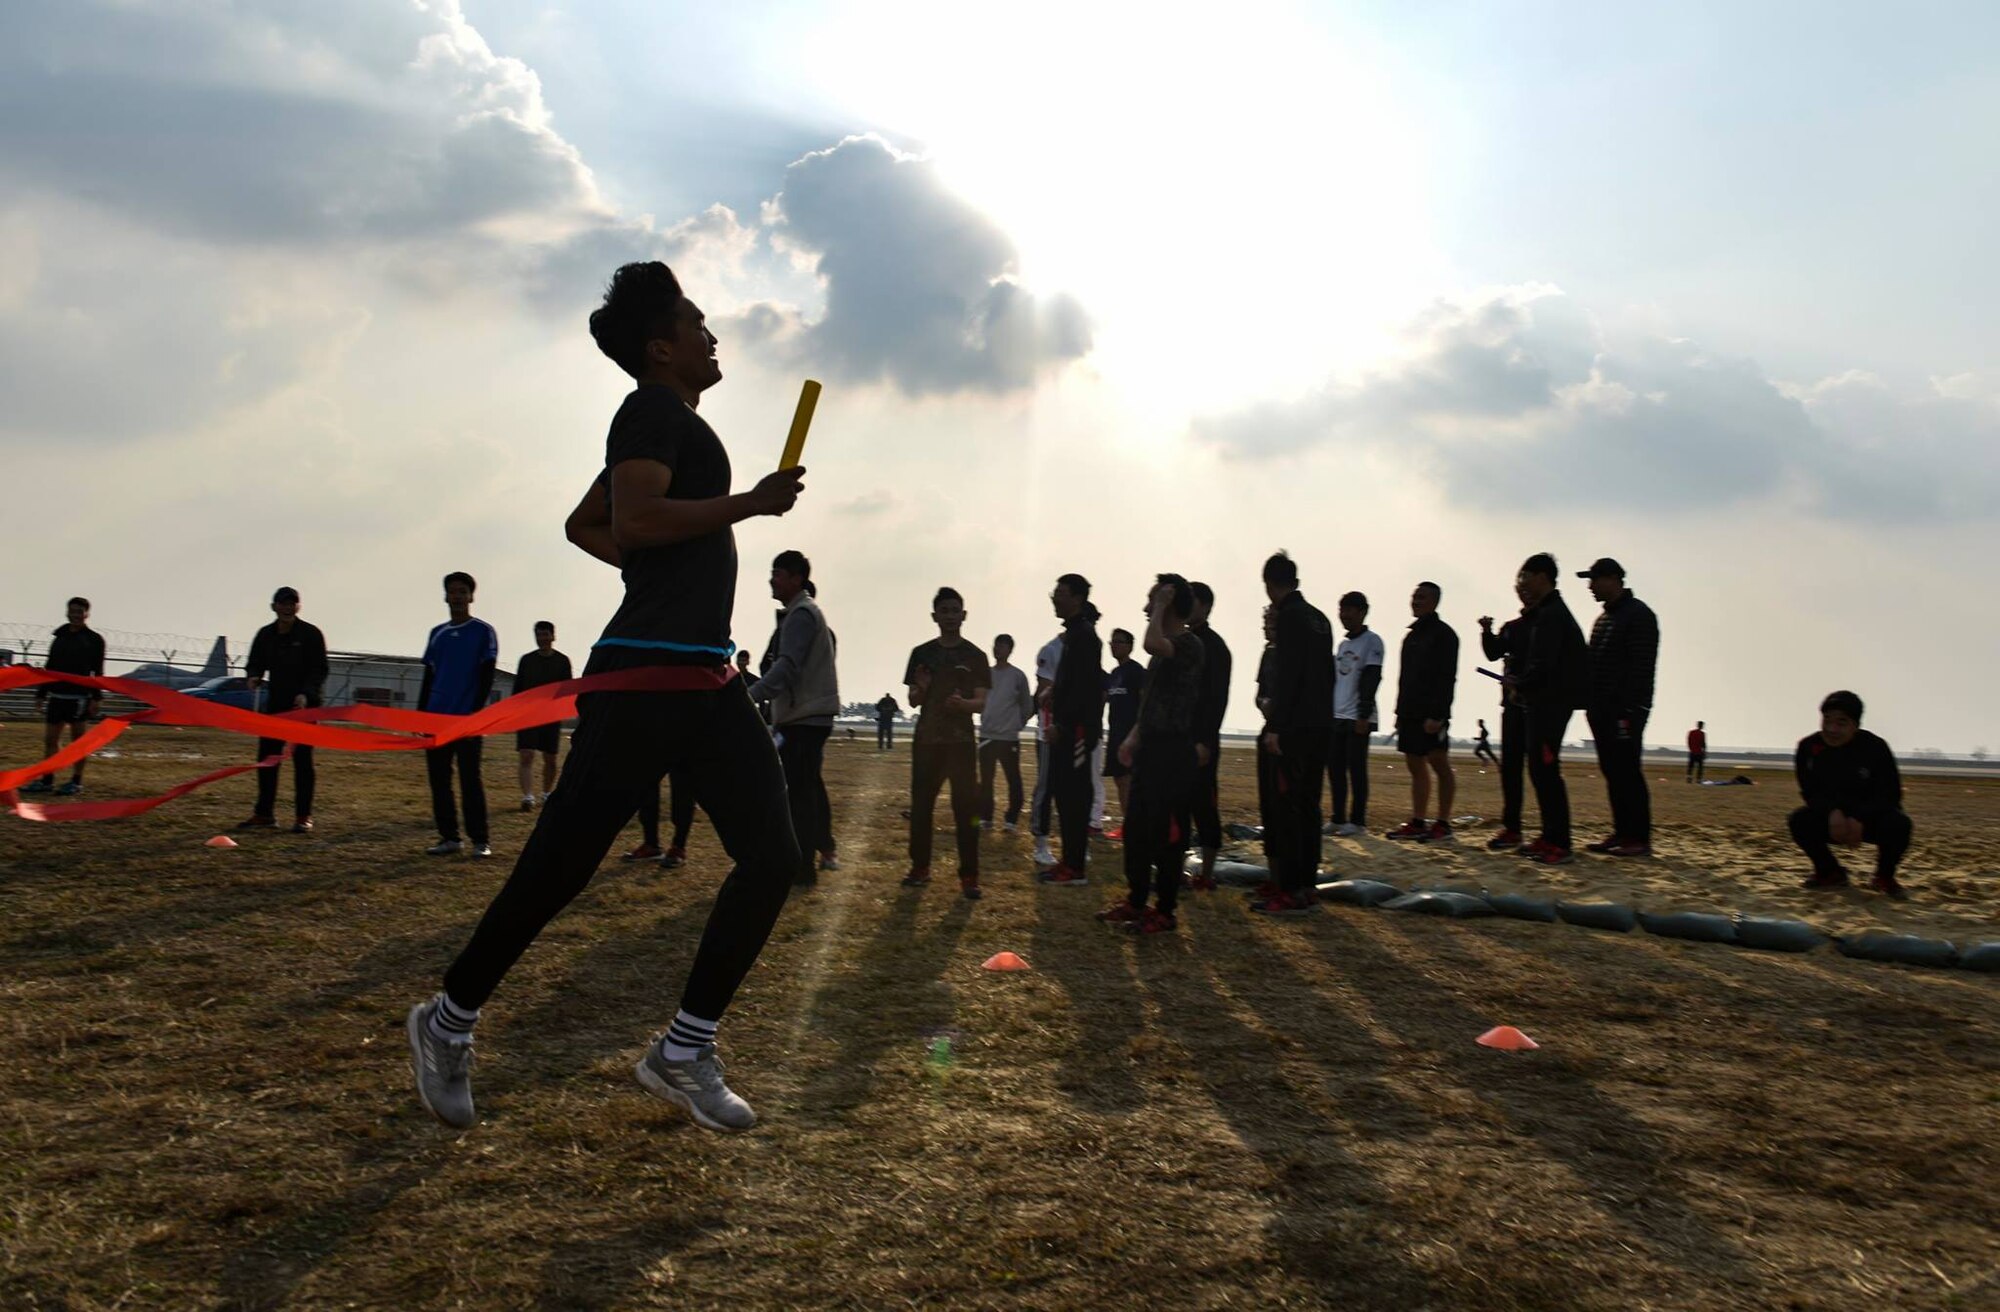 A member from the Republic of Korea Air Force 38th Fighter Group finishes a relay race on Kunsan Air Base, Republic of Korea, Nov. 9, 2018. Participants in the 2018 US-ROKAF Friendship Day competed in a variety of sports and interactive events, such as basketball, volleyball, the video game “League of Legends”, golf, bowling, and soccer. (U.S. Air Force photo by Senior Airman Stefan Alvarez)